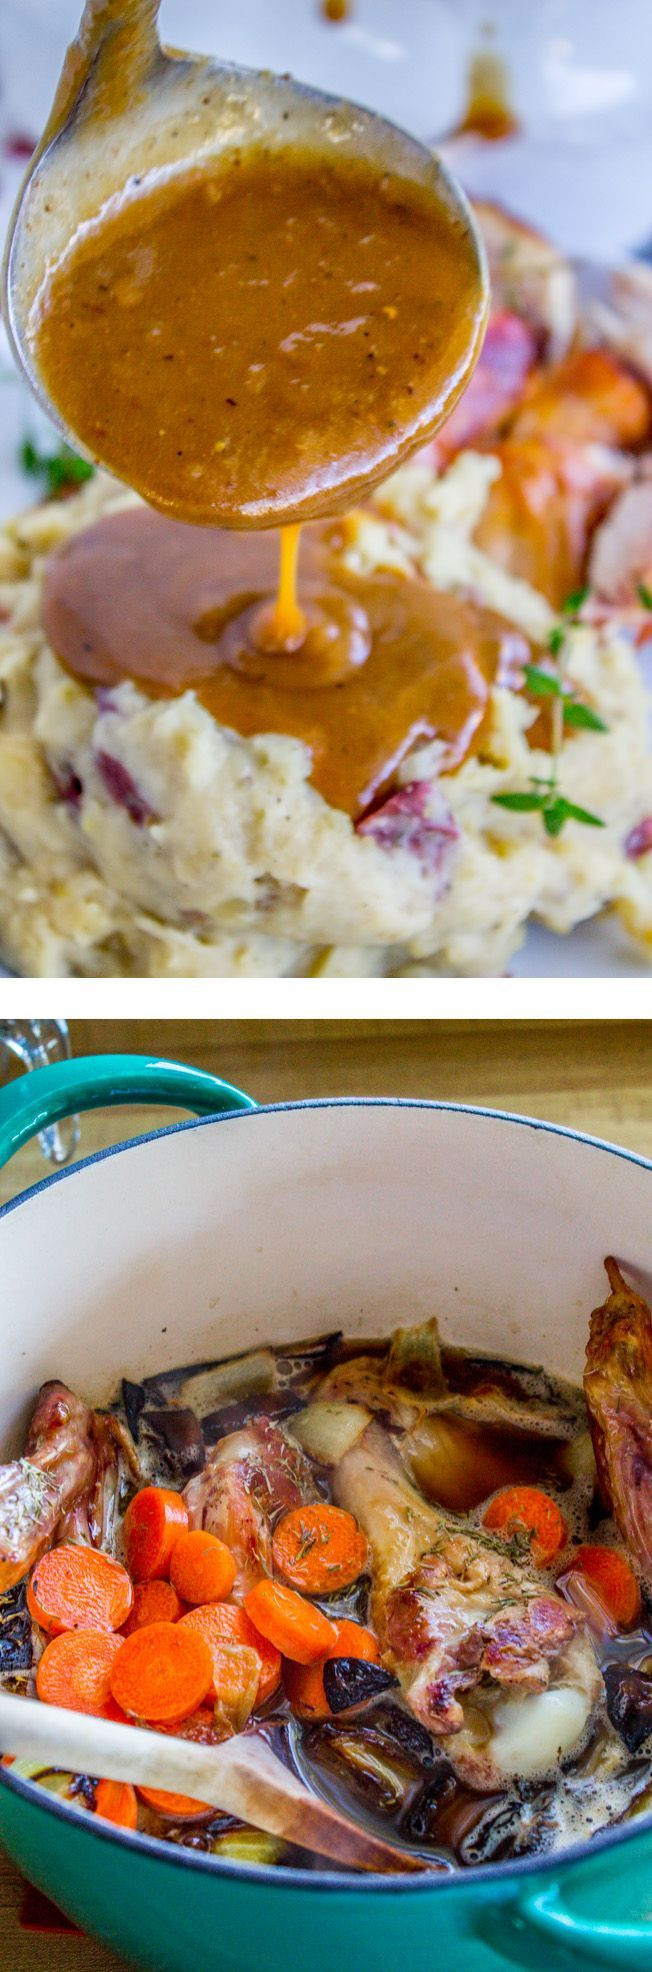 Easy Make Ahead Turkey Gravy
 This make ahead and freeze gravy is so easy and saves